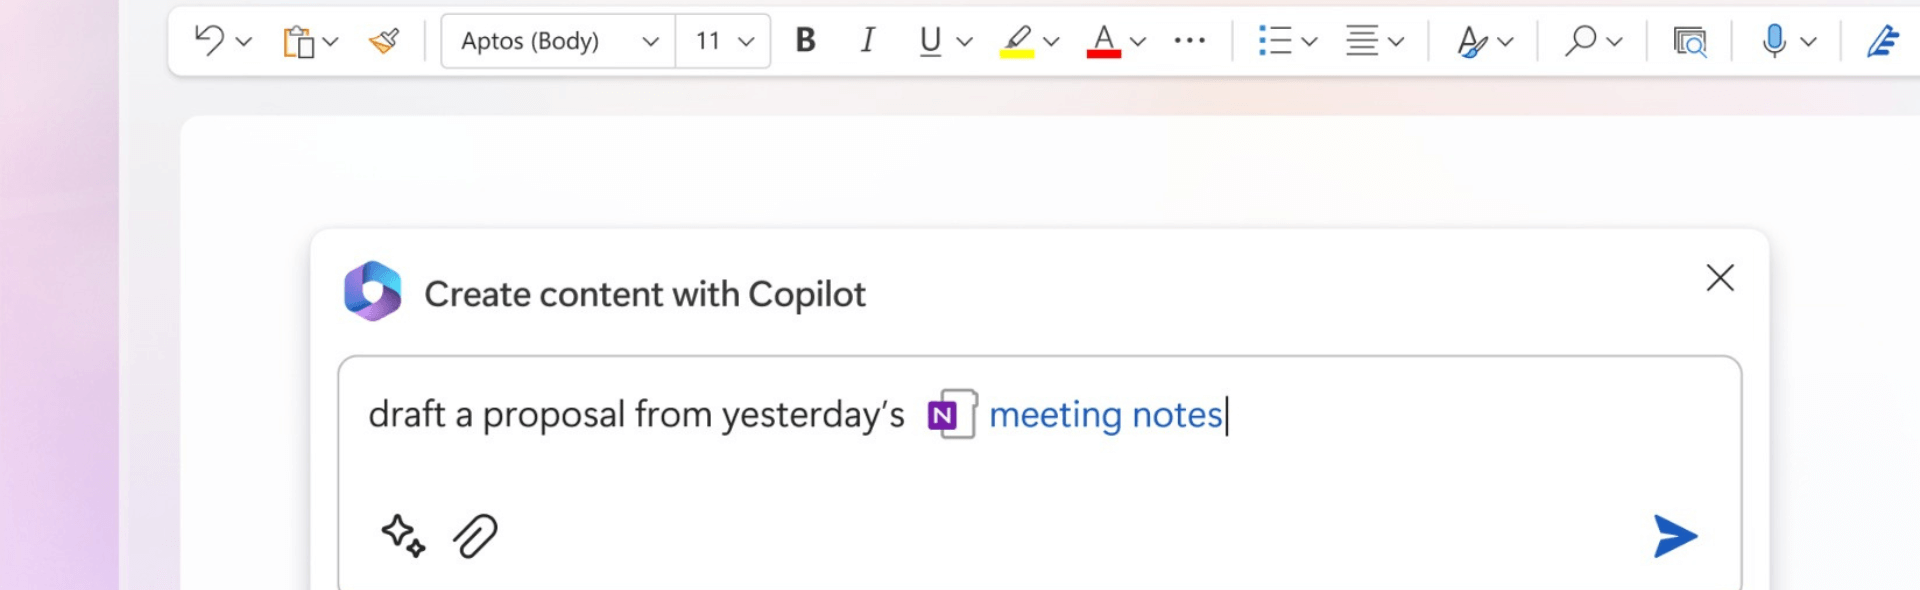 Complete guide on how to use Microsoft Copilot